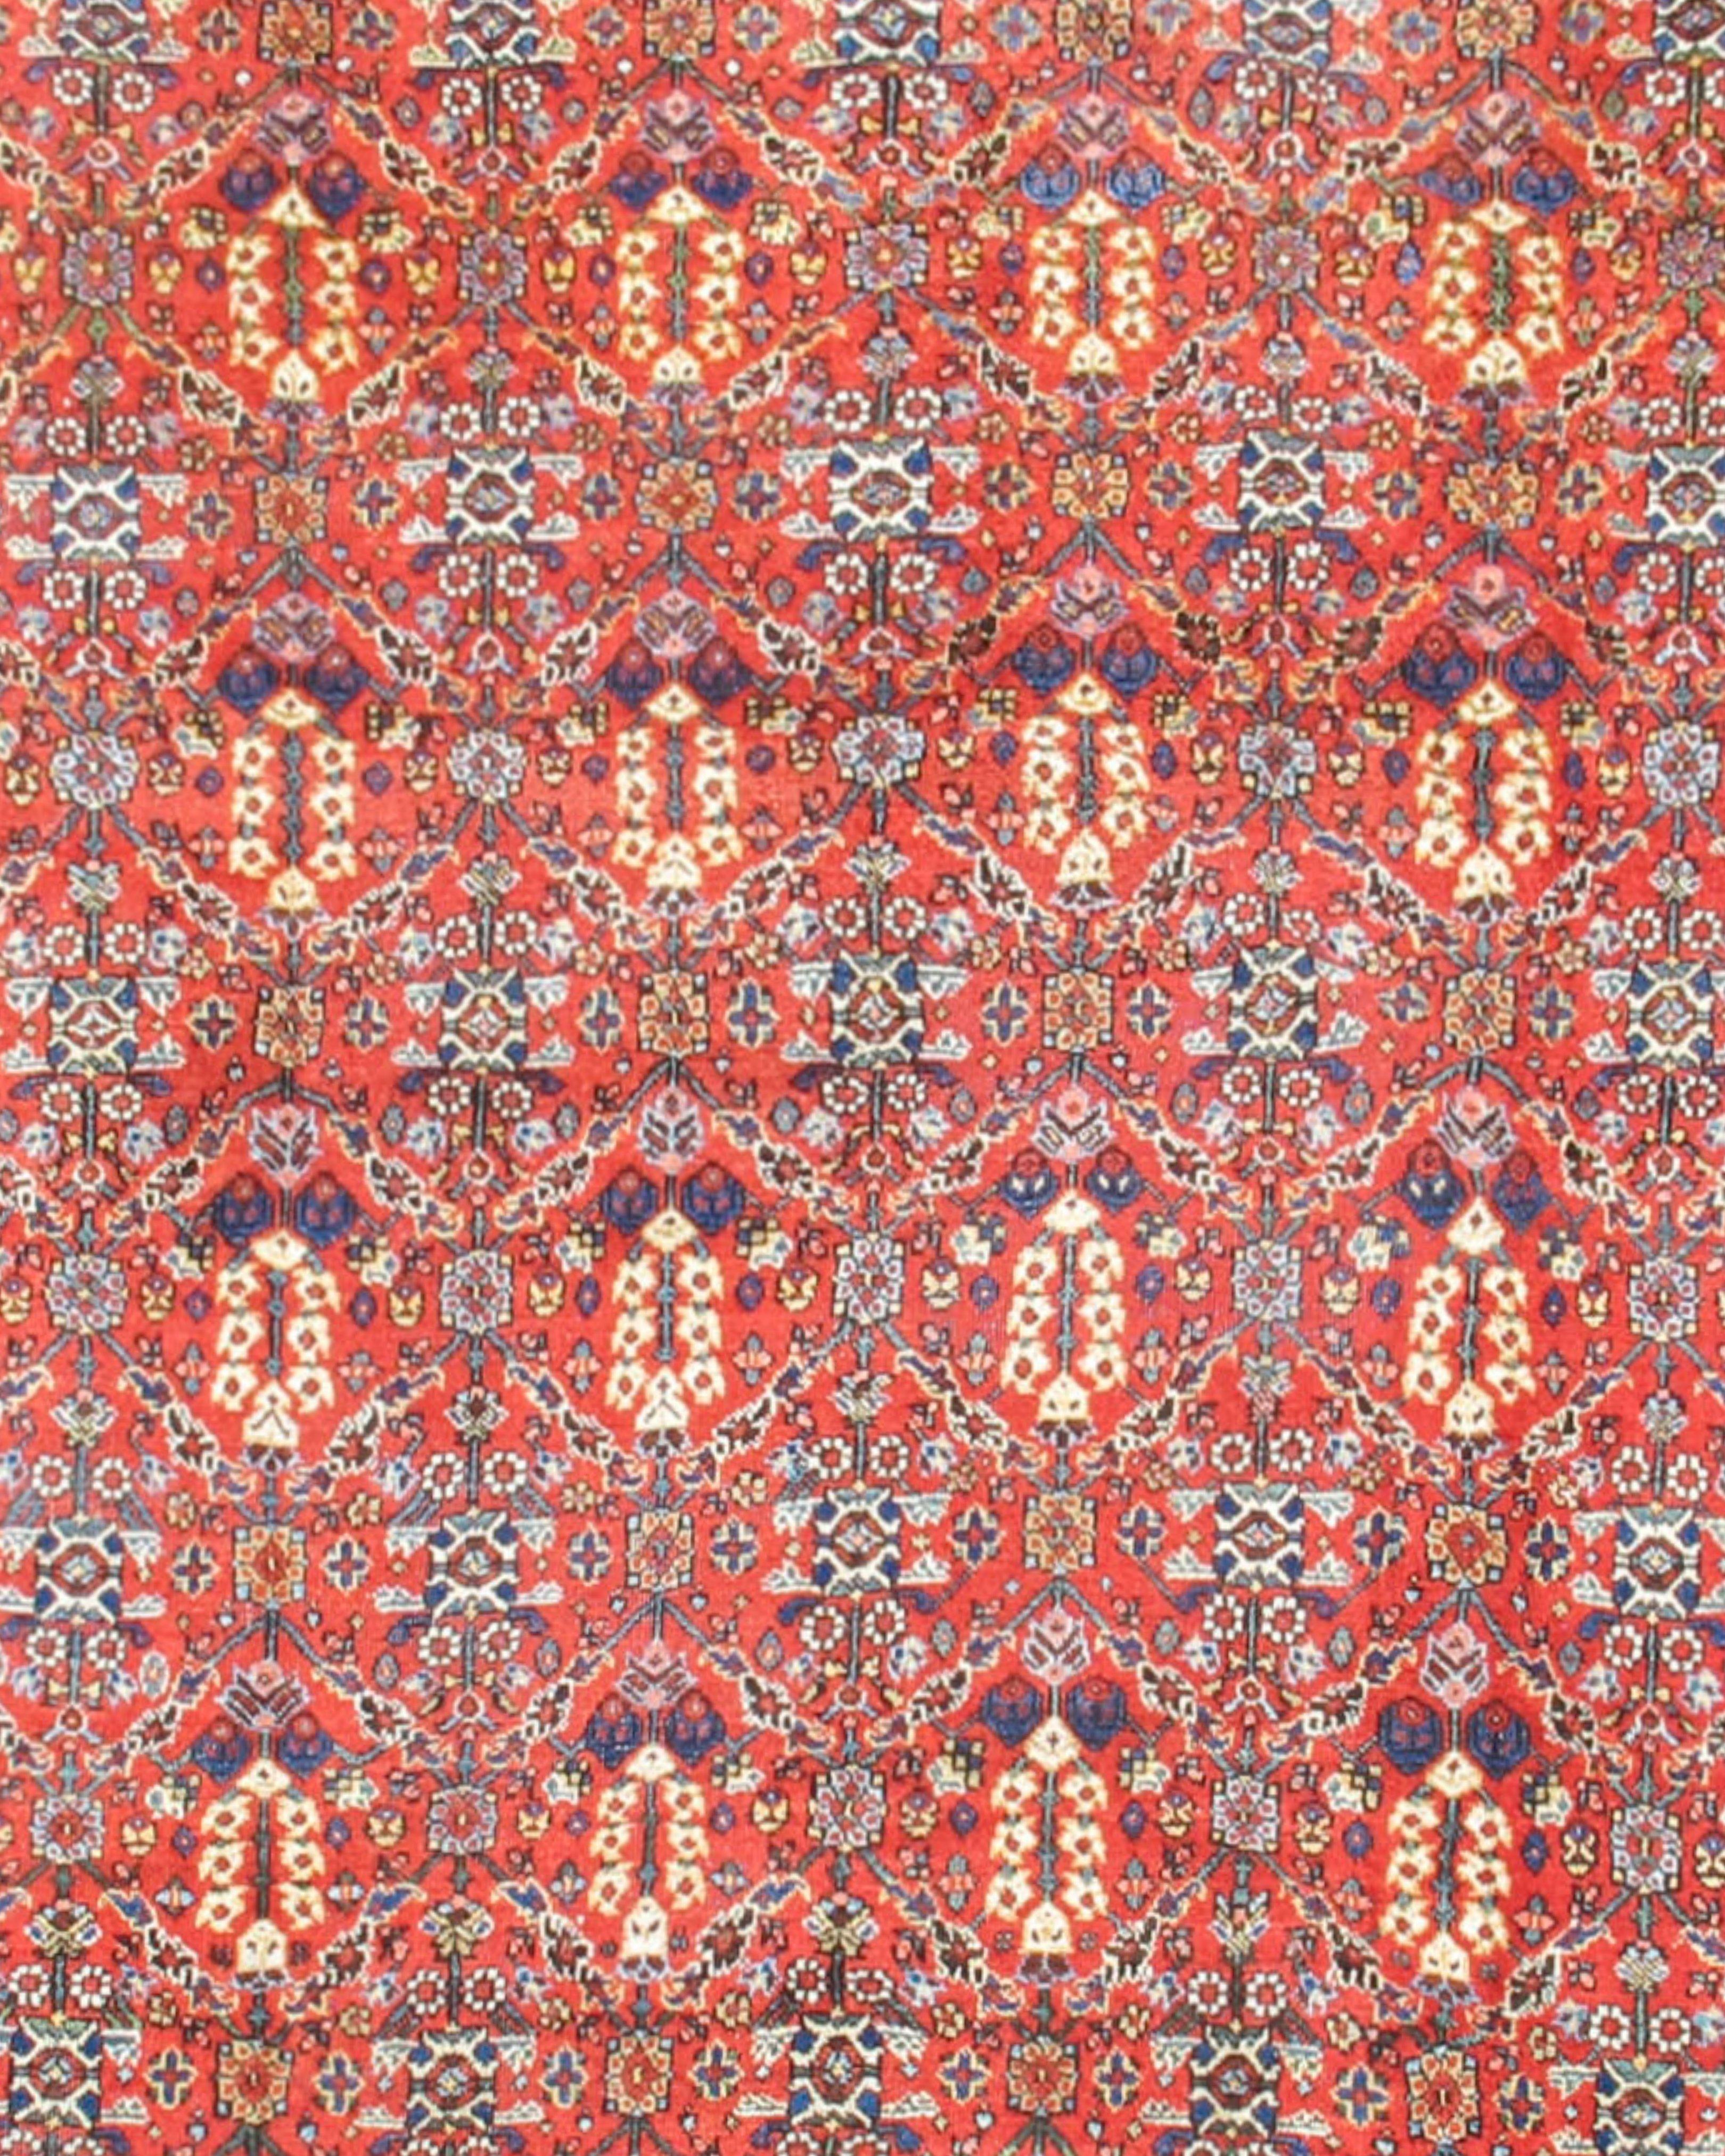 Antique Persian Mahal Rug, Early 20th Century

Additional Information:
Dimensions: 10'4